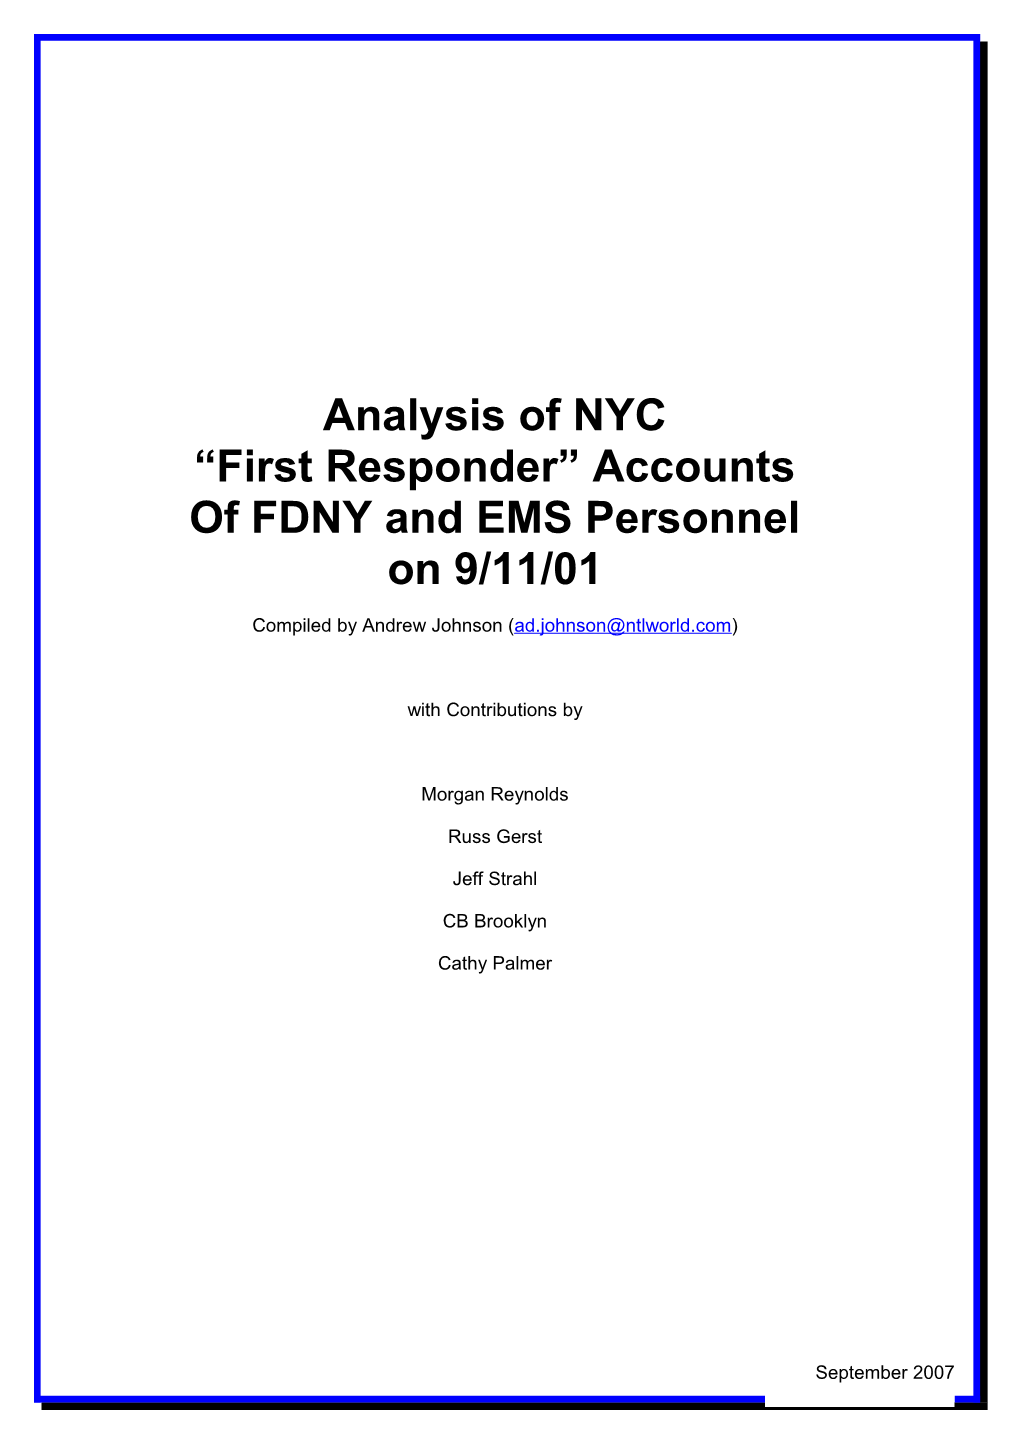 Report on Instances of Descriptions of Plane Hits from First Responder Testimonies